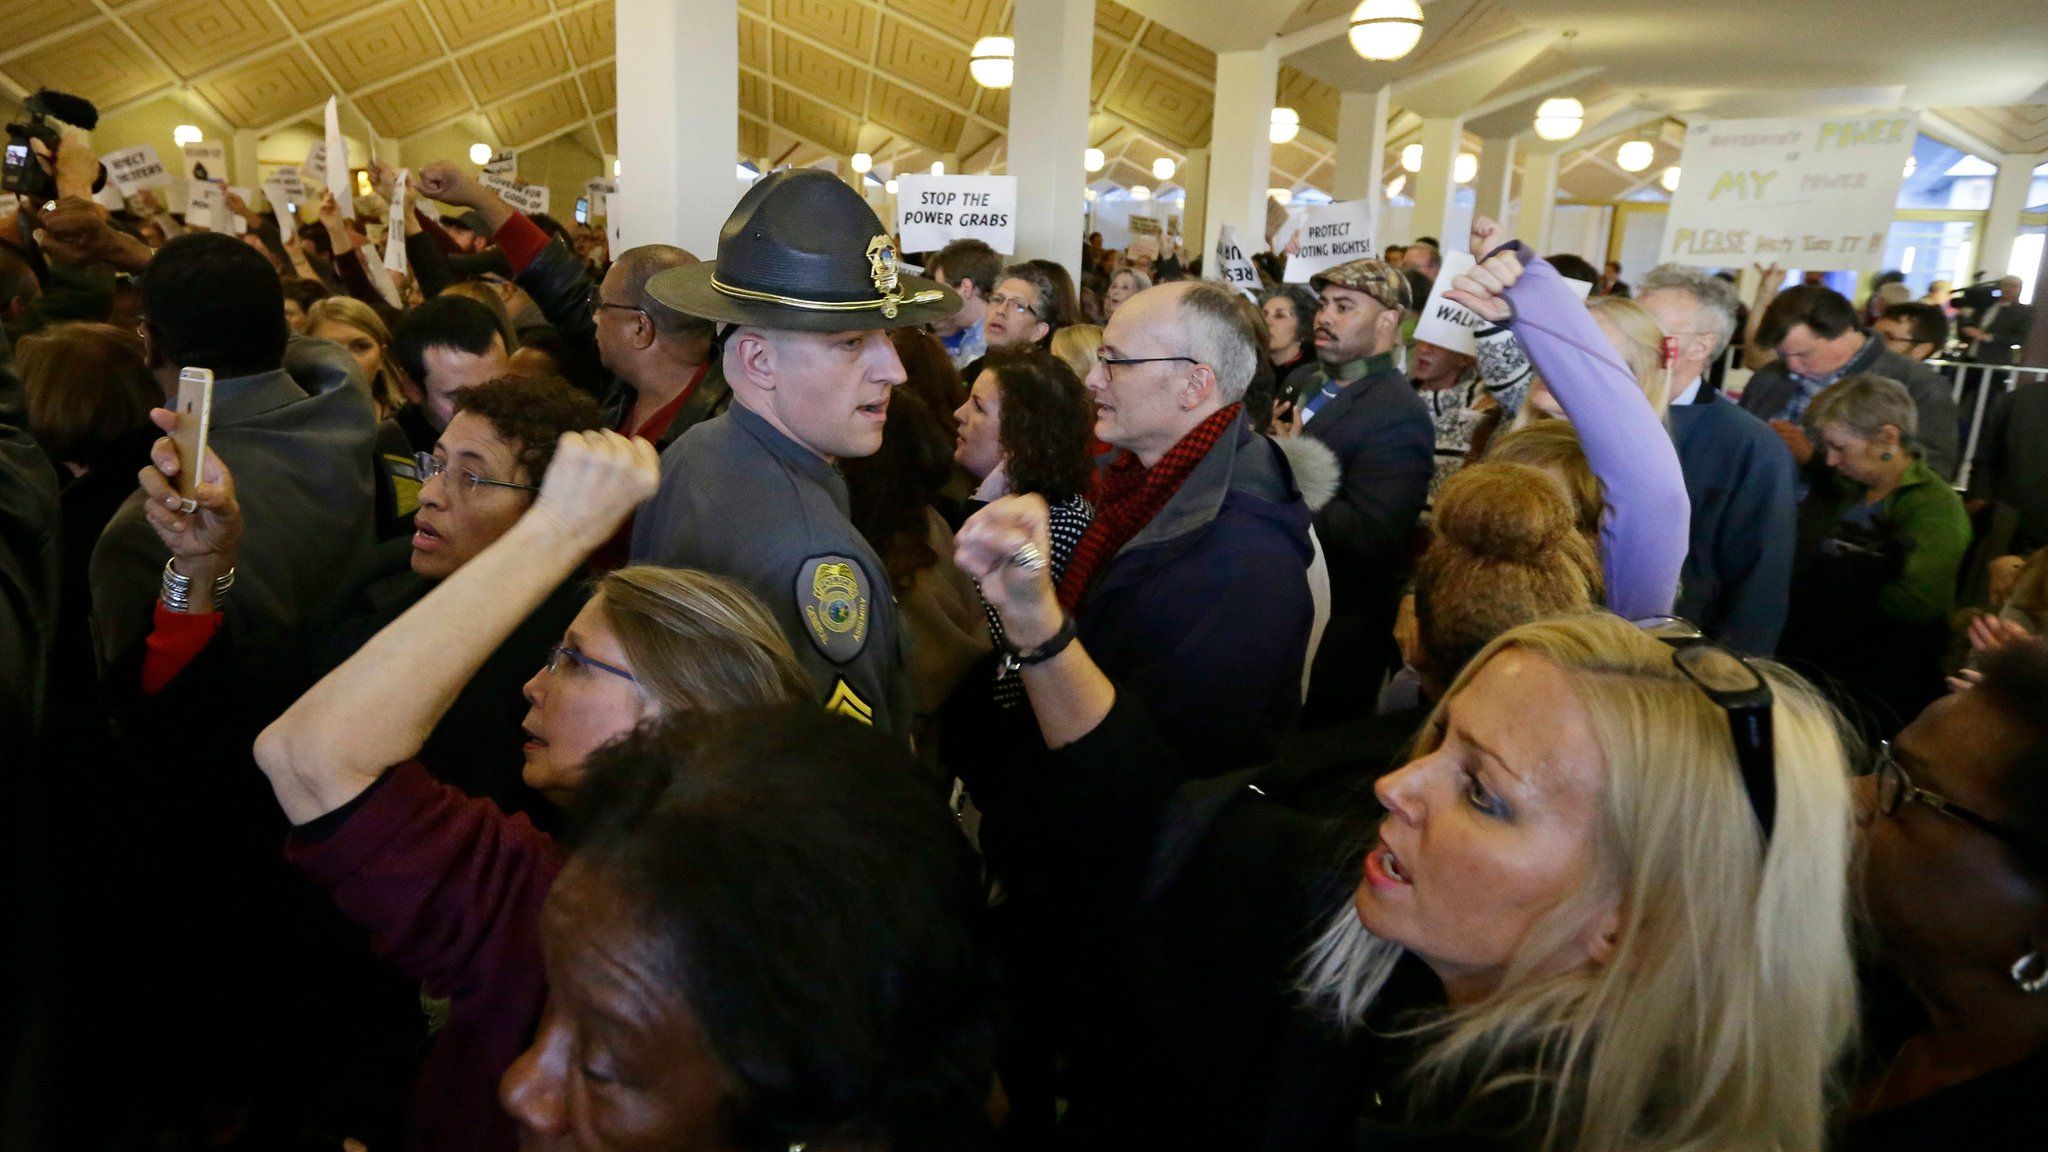 Demonstrators crowd the rotunda outside the House and Senate galleries during a special session at the North Carolina Legislature in Raleigh, N.C., Thursday, Dec. 15, 2016.